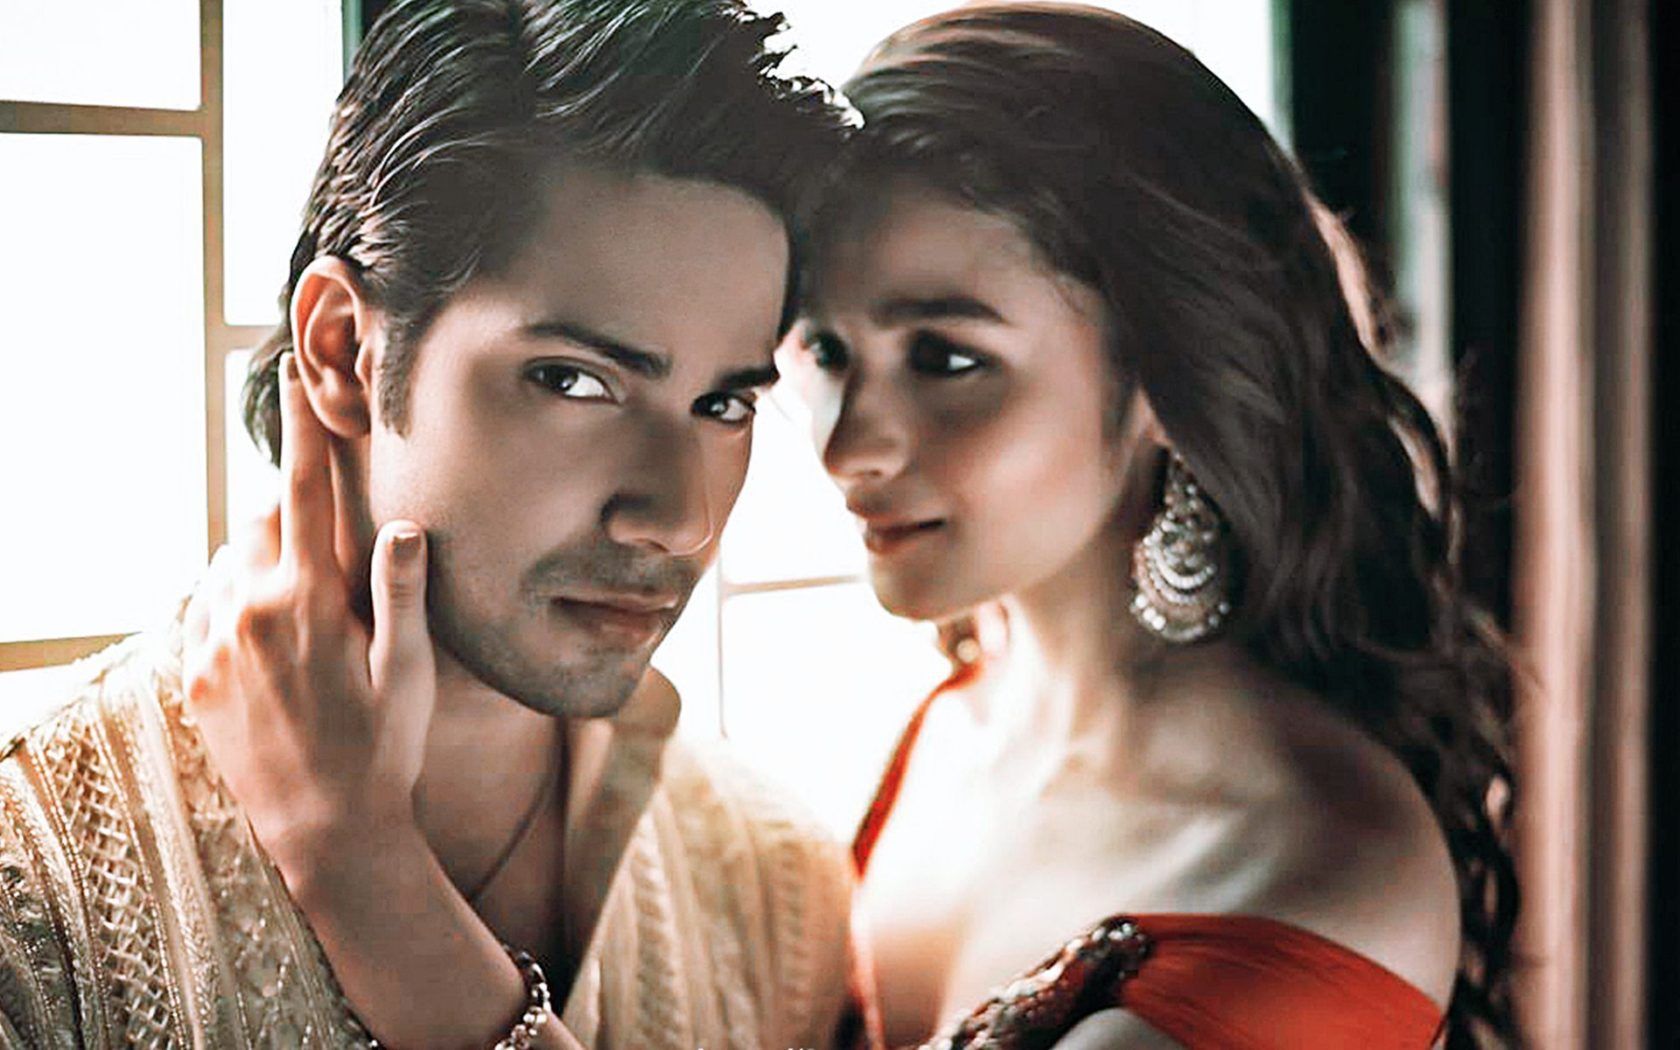 Love Wallpaper Varun Dhawan Indian Actor And Alia Bhatt Actress And Singer Of Indian Descent And British Citizenship Wallpaper HD Free Download, Wallpaper13.com